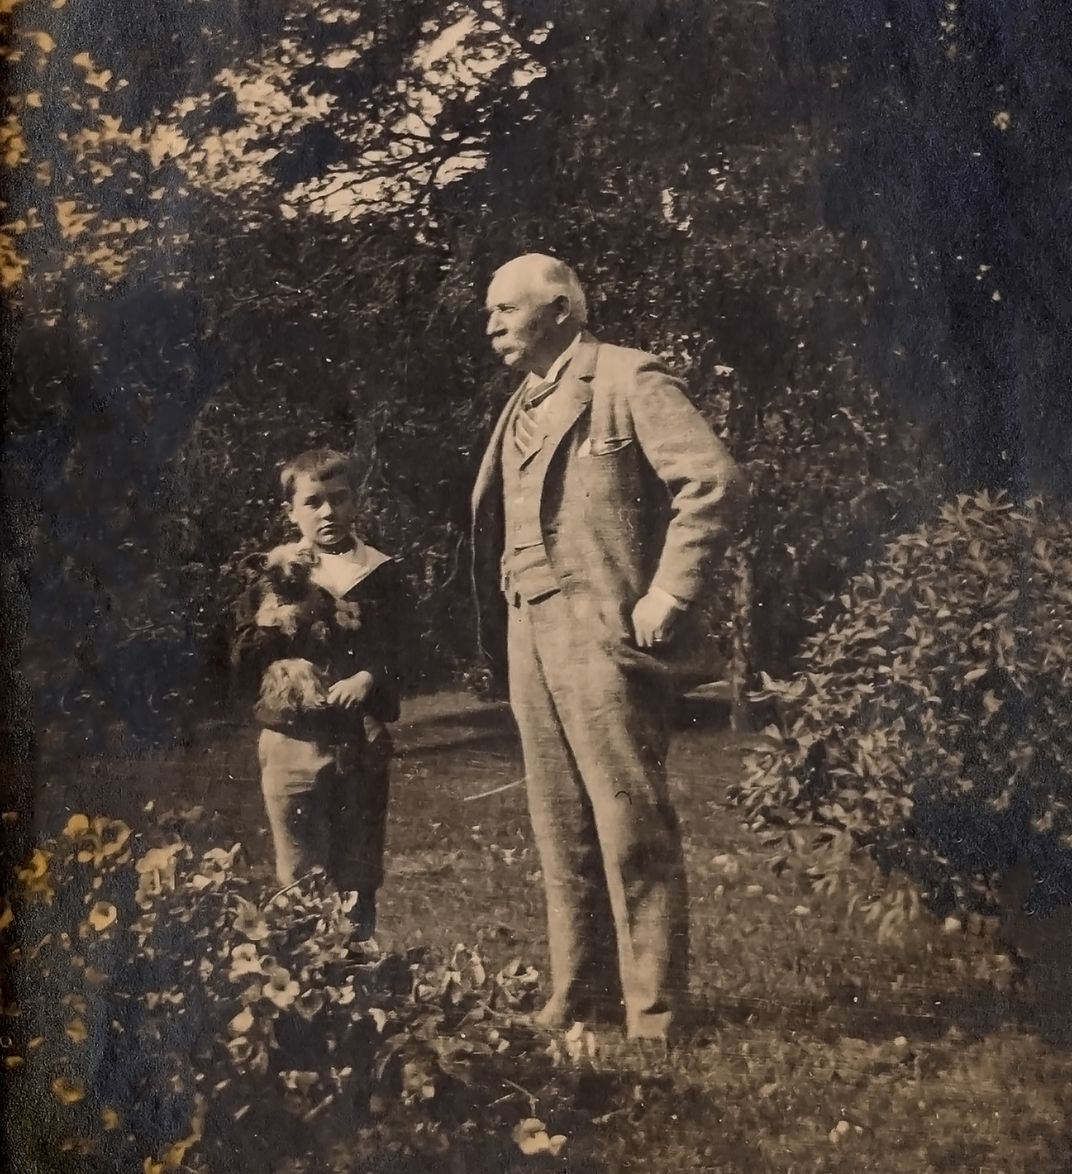 Rockwell (right) and his grandson Almon (left), photographed around the turn of the 20th century